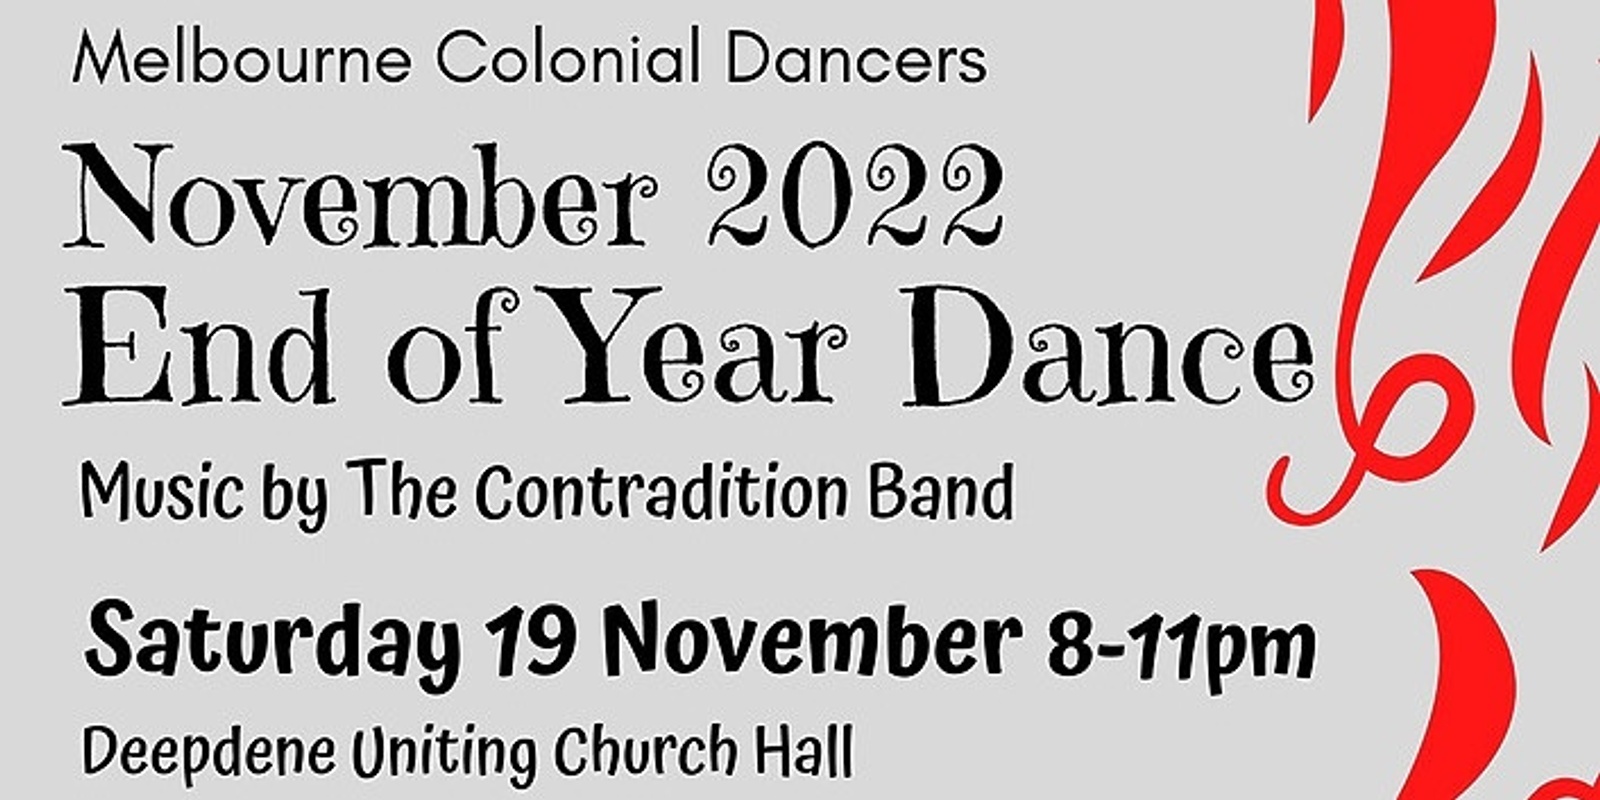 Banner image for Melbourne Colonial Dancers End of Year Dance